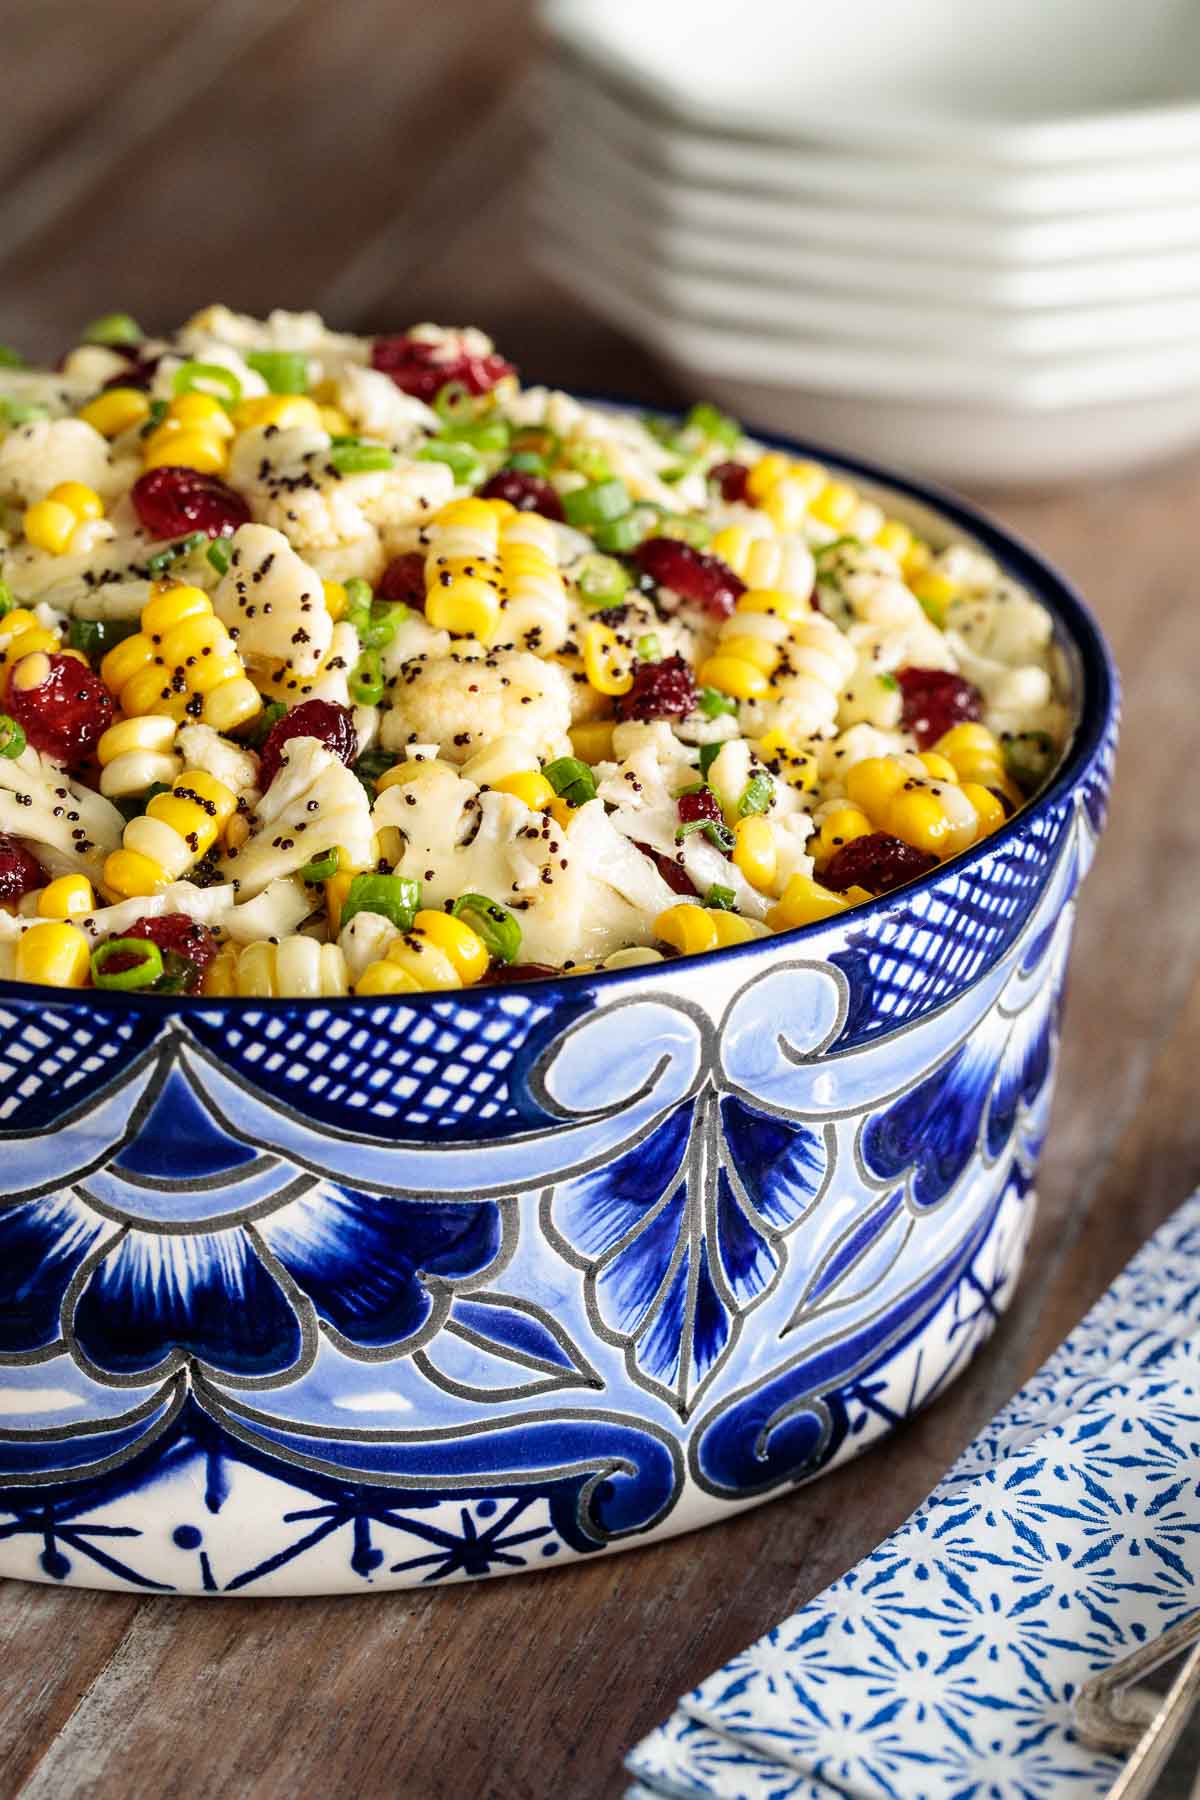 Table photo of a Poppyseed Cauliflower and Fresh Corn Salad in a blue and white Mexican patterned serving bowl.